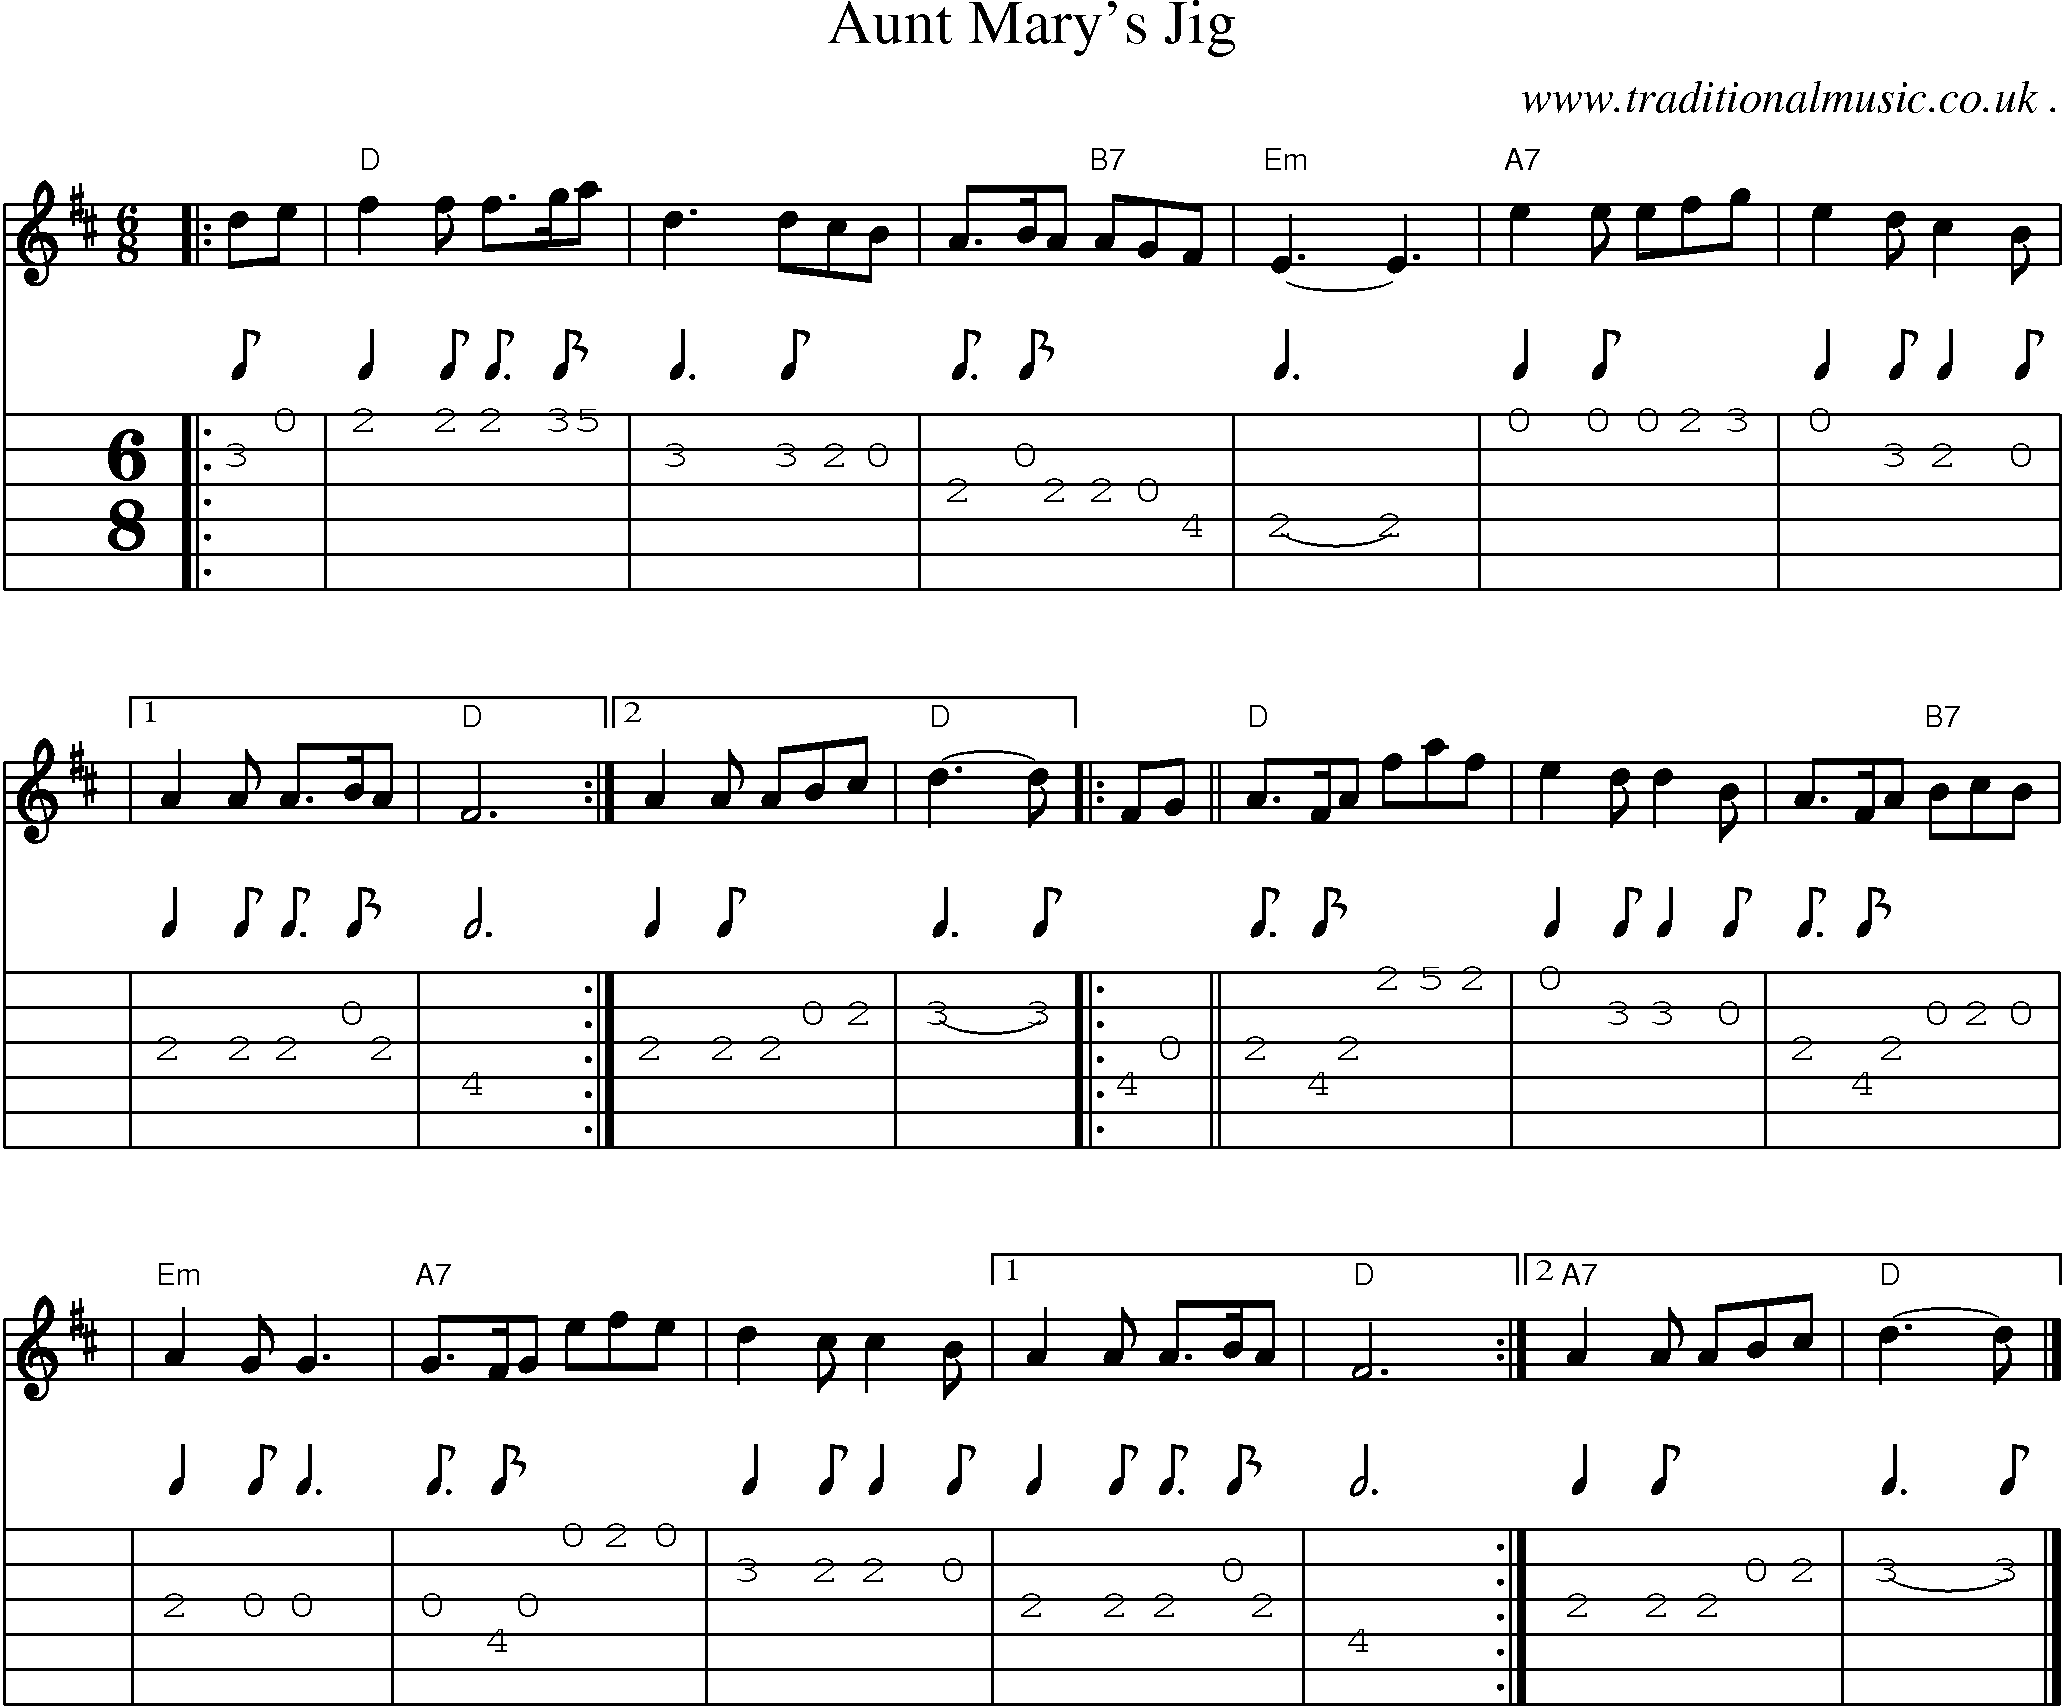 Sheet-music  score, Chords and Guitar Tabs for Aunt Marys Jig